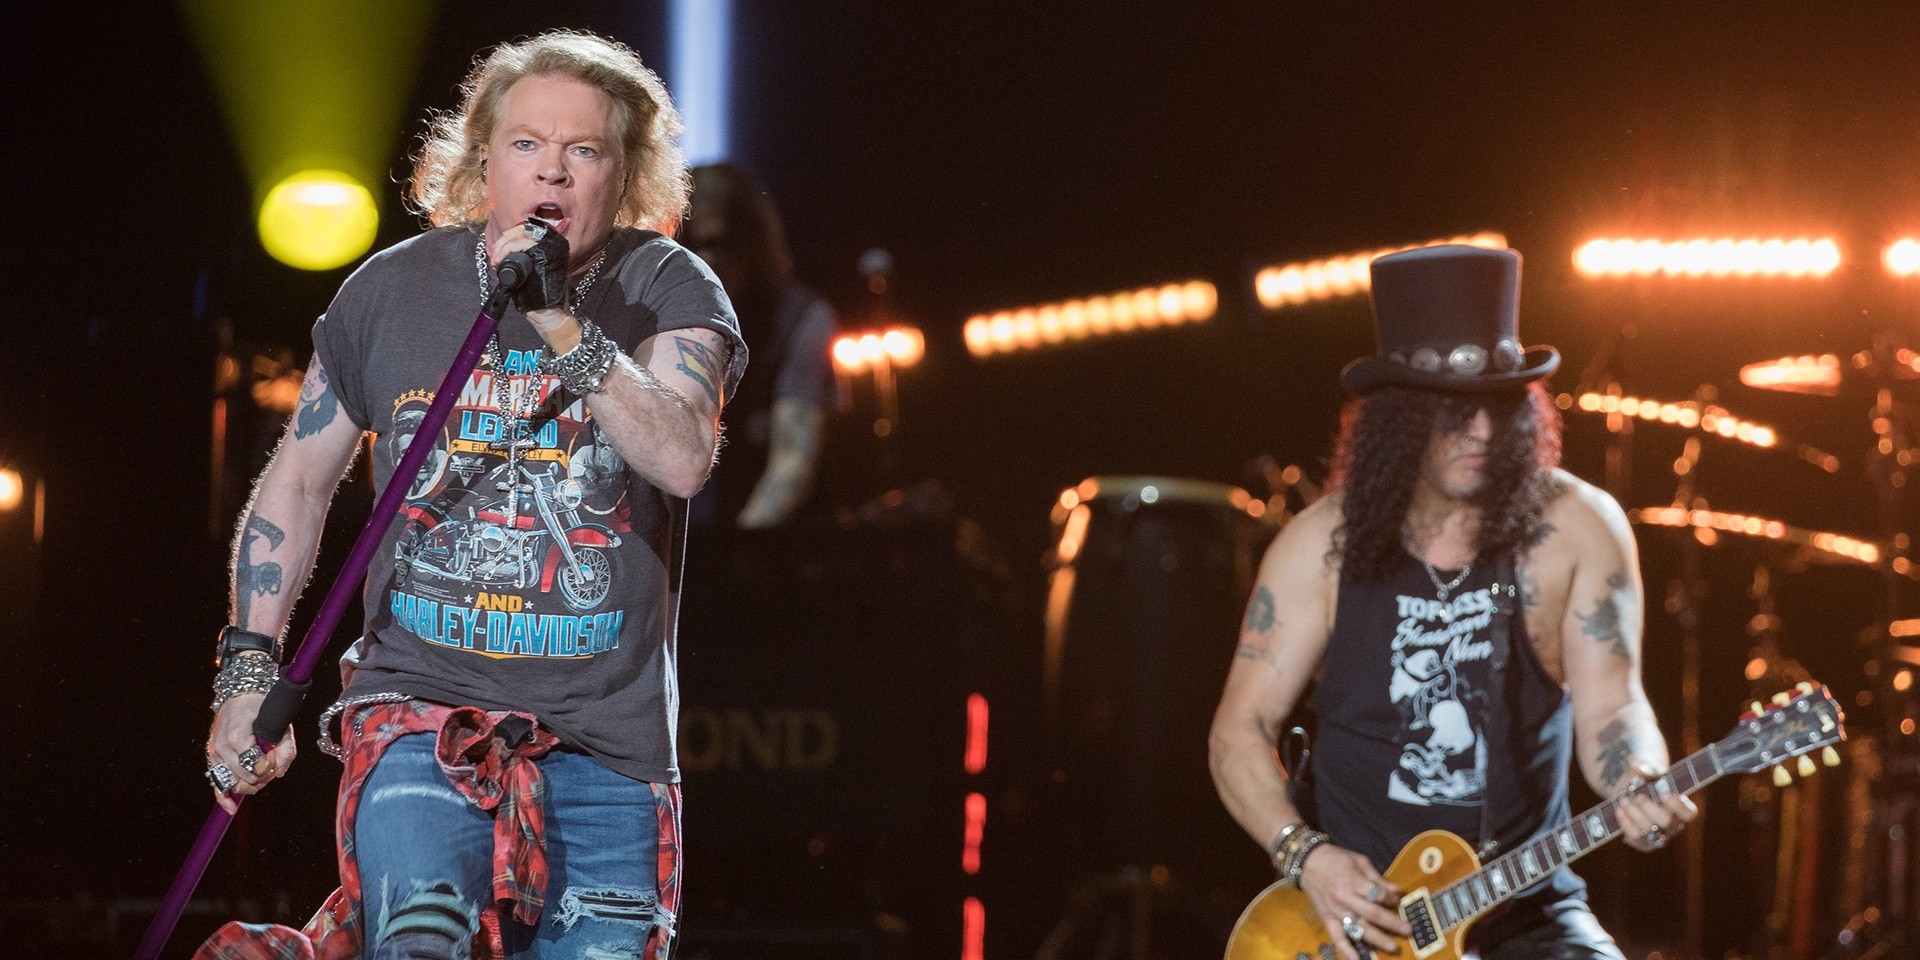 GIG REPORT: Guns N' Roses defy expectations with thrilling first show in Singapore